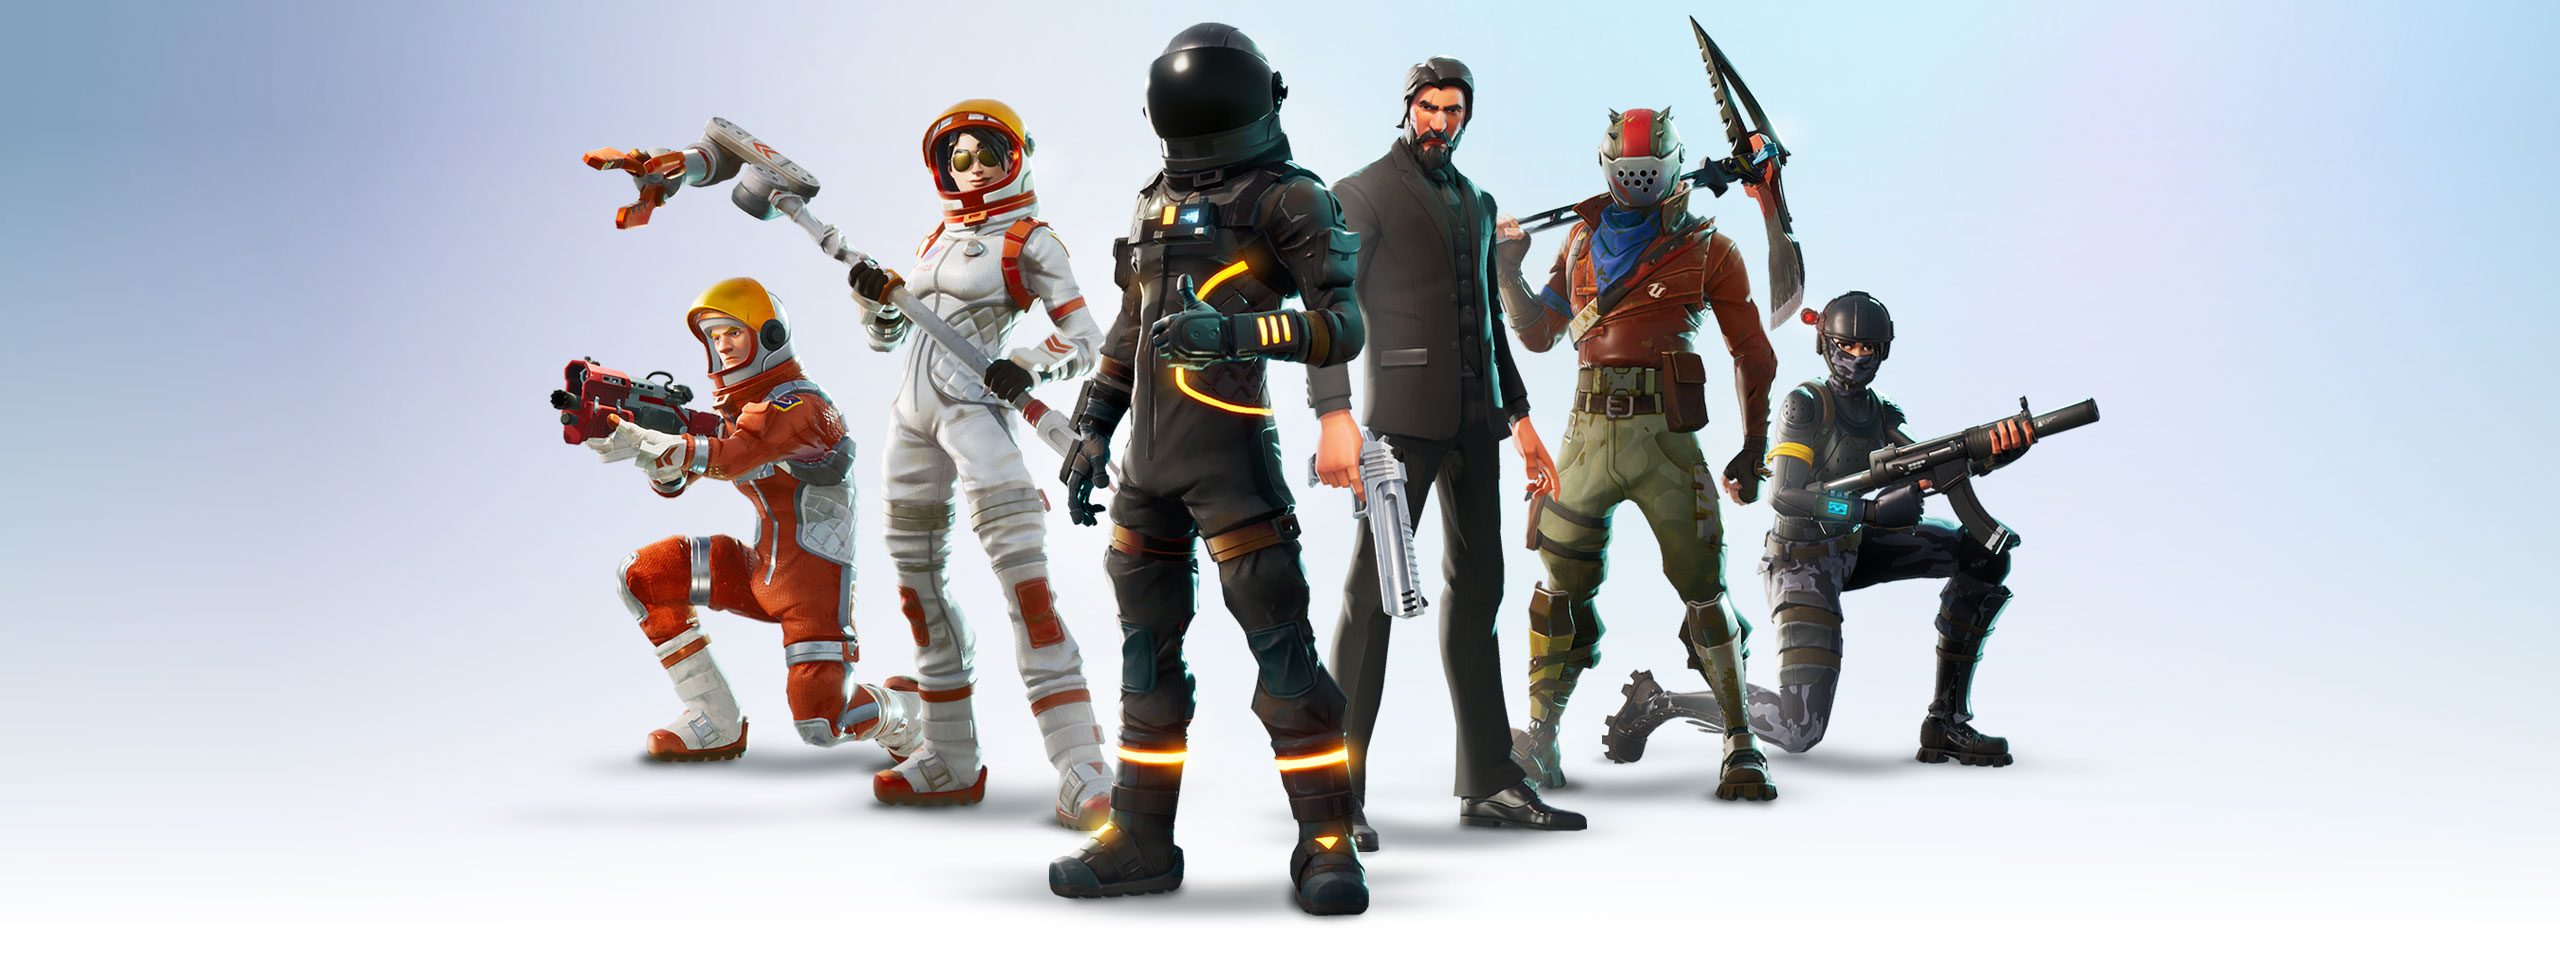 OPINION: Fortnite’s popularity is warranted